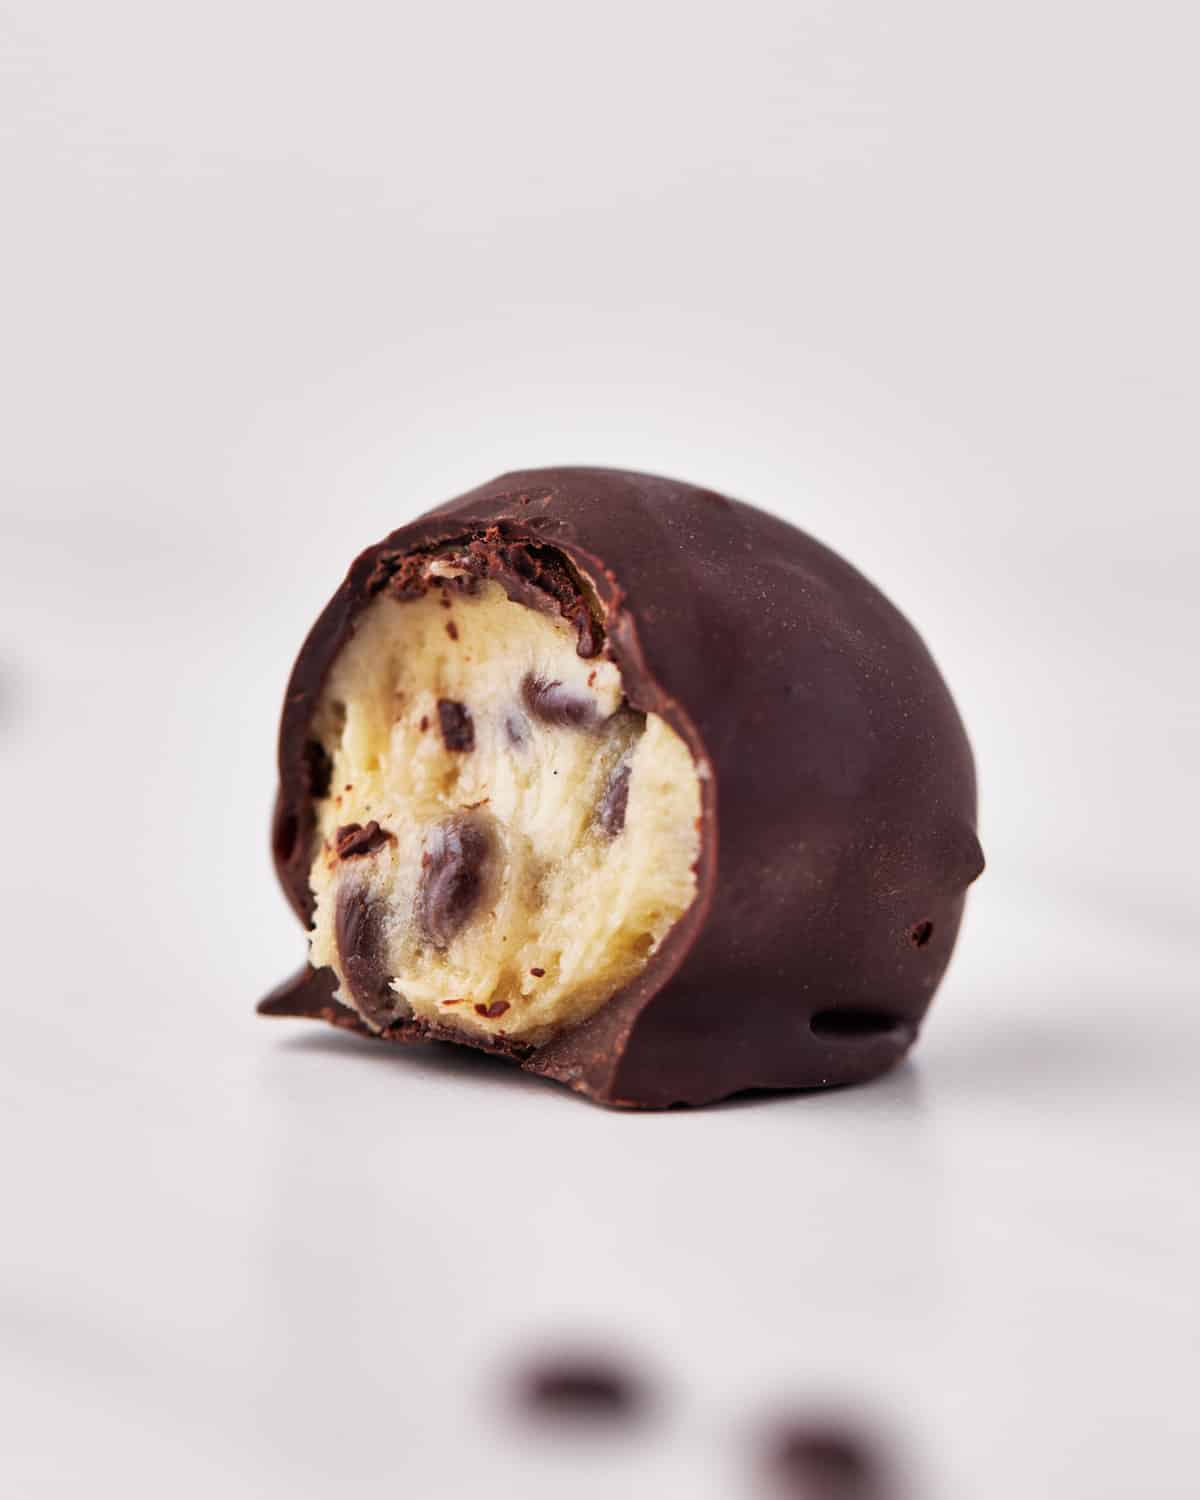 single chocolate covered cookie dough bite, with a bite taken out.